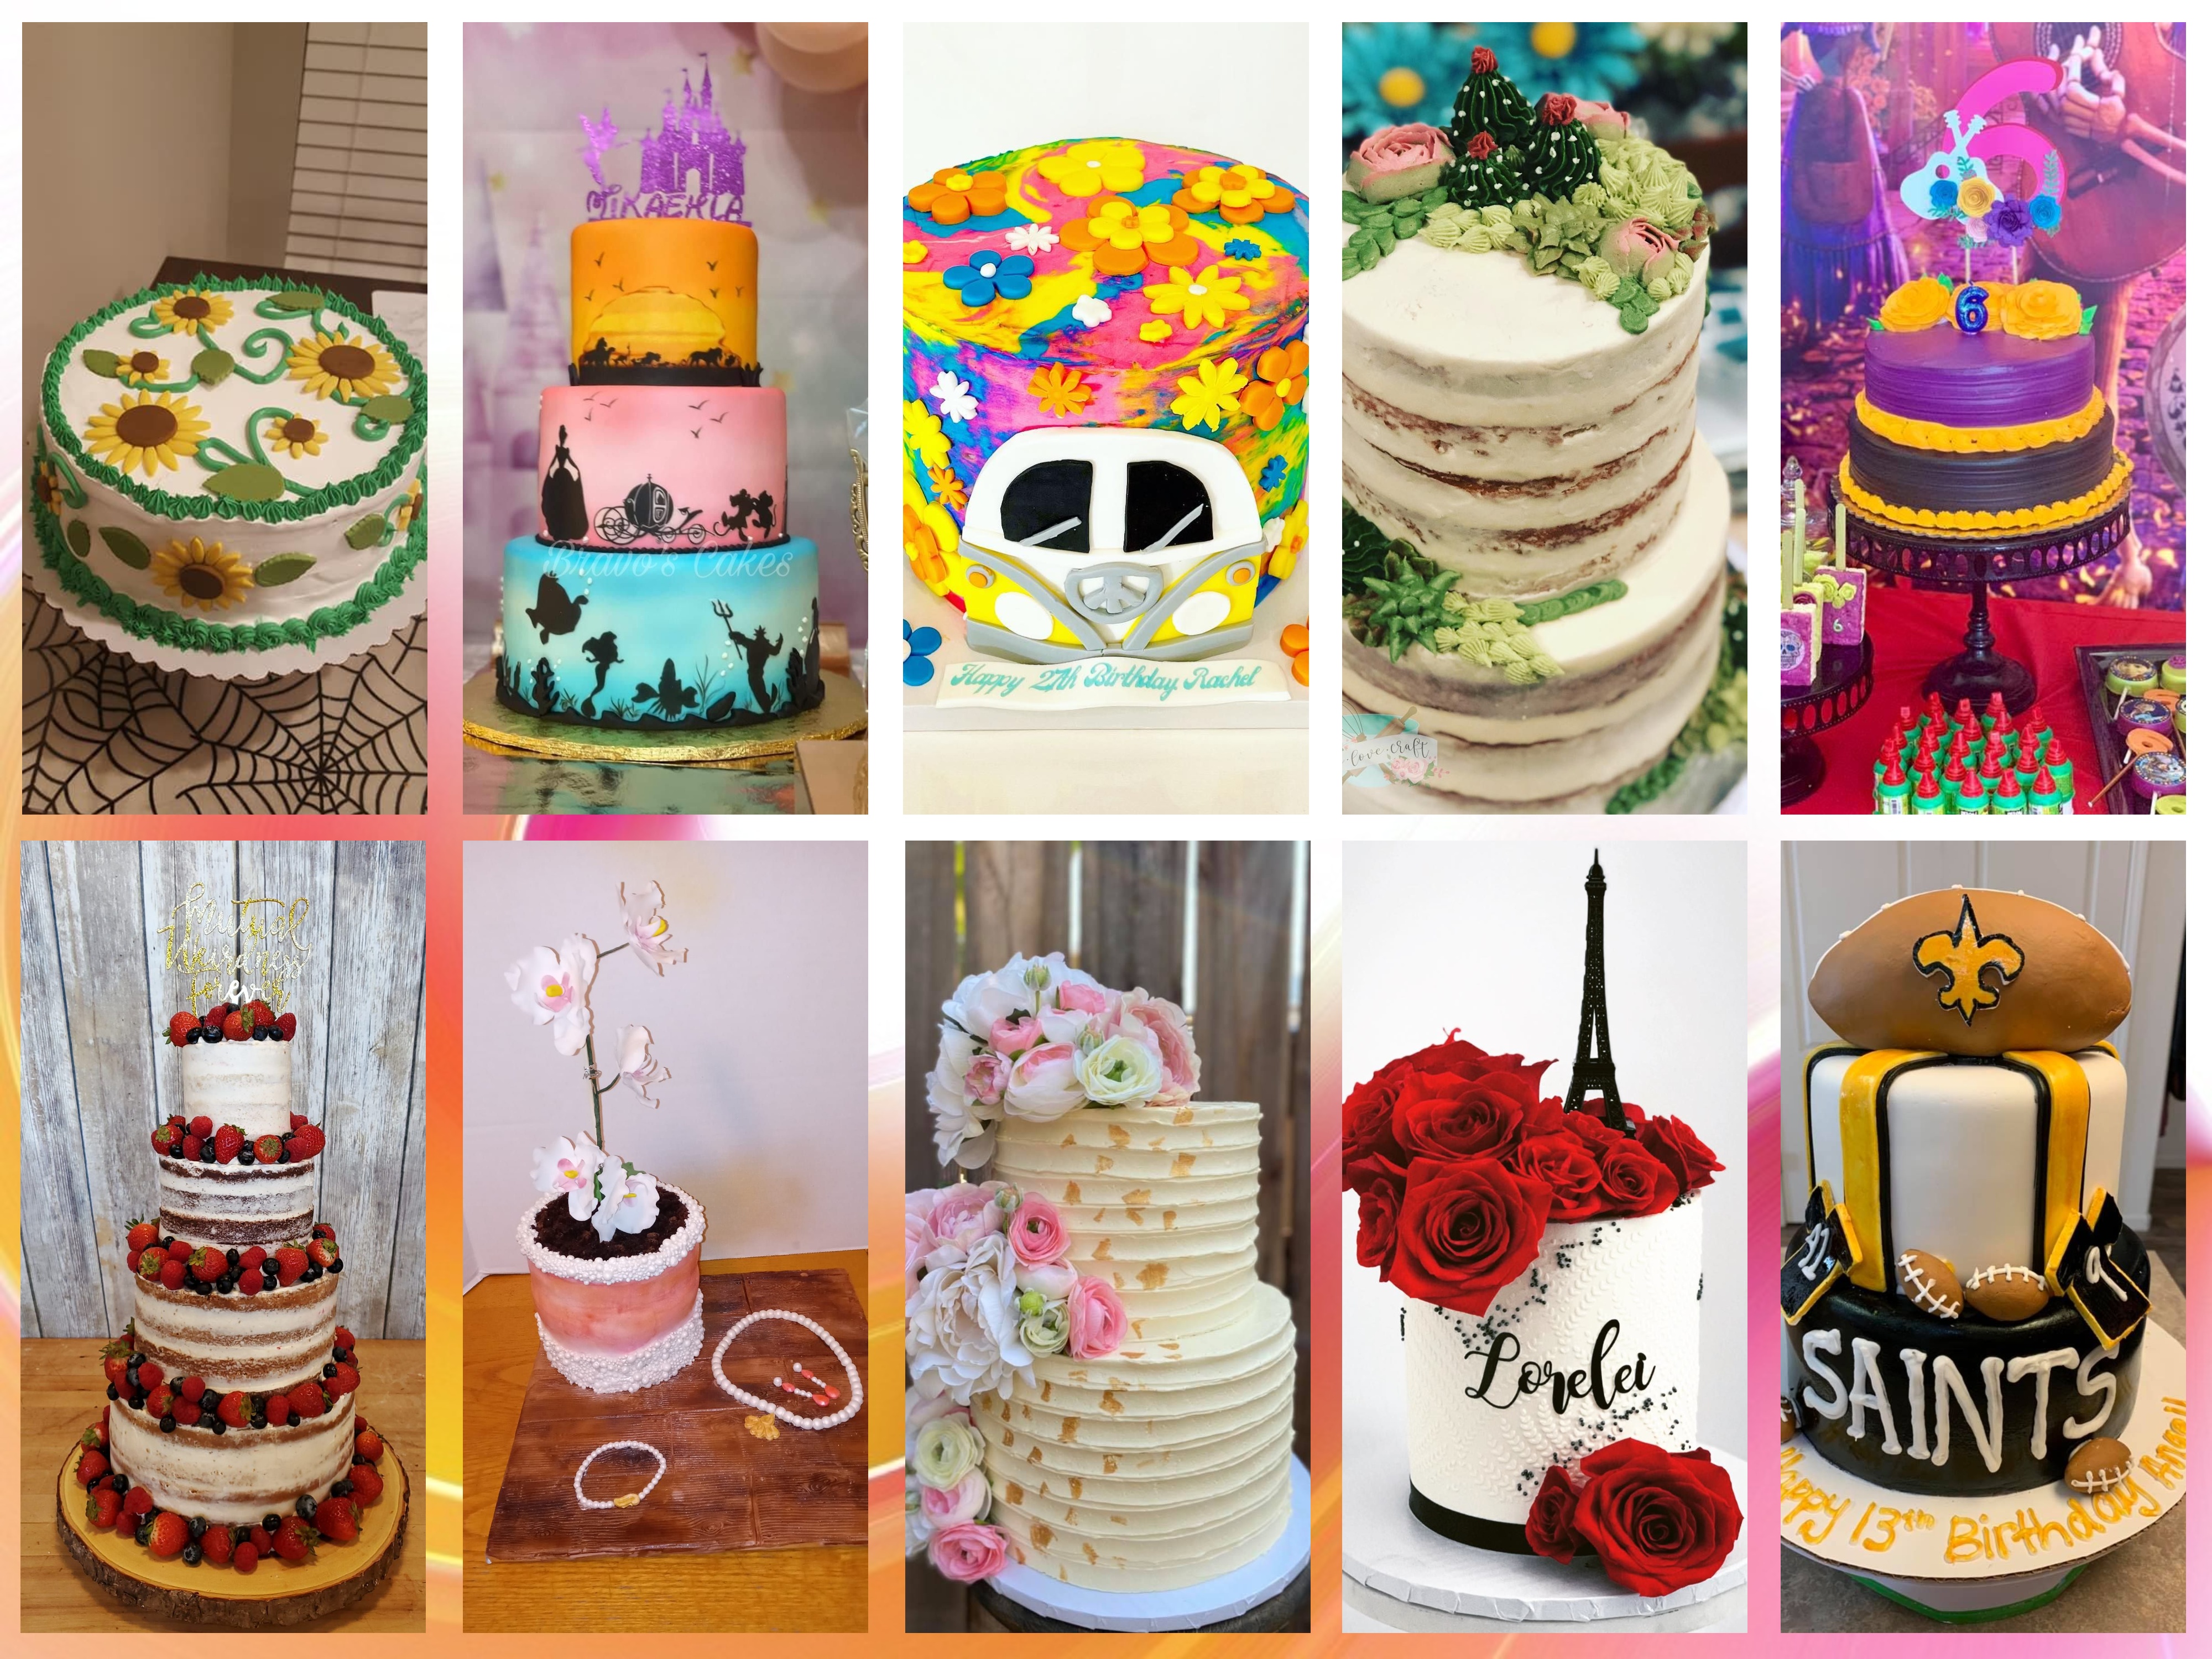 Details more than 71 photo montage cake latest - in.daotaonec